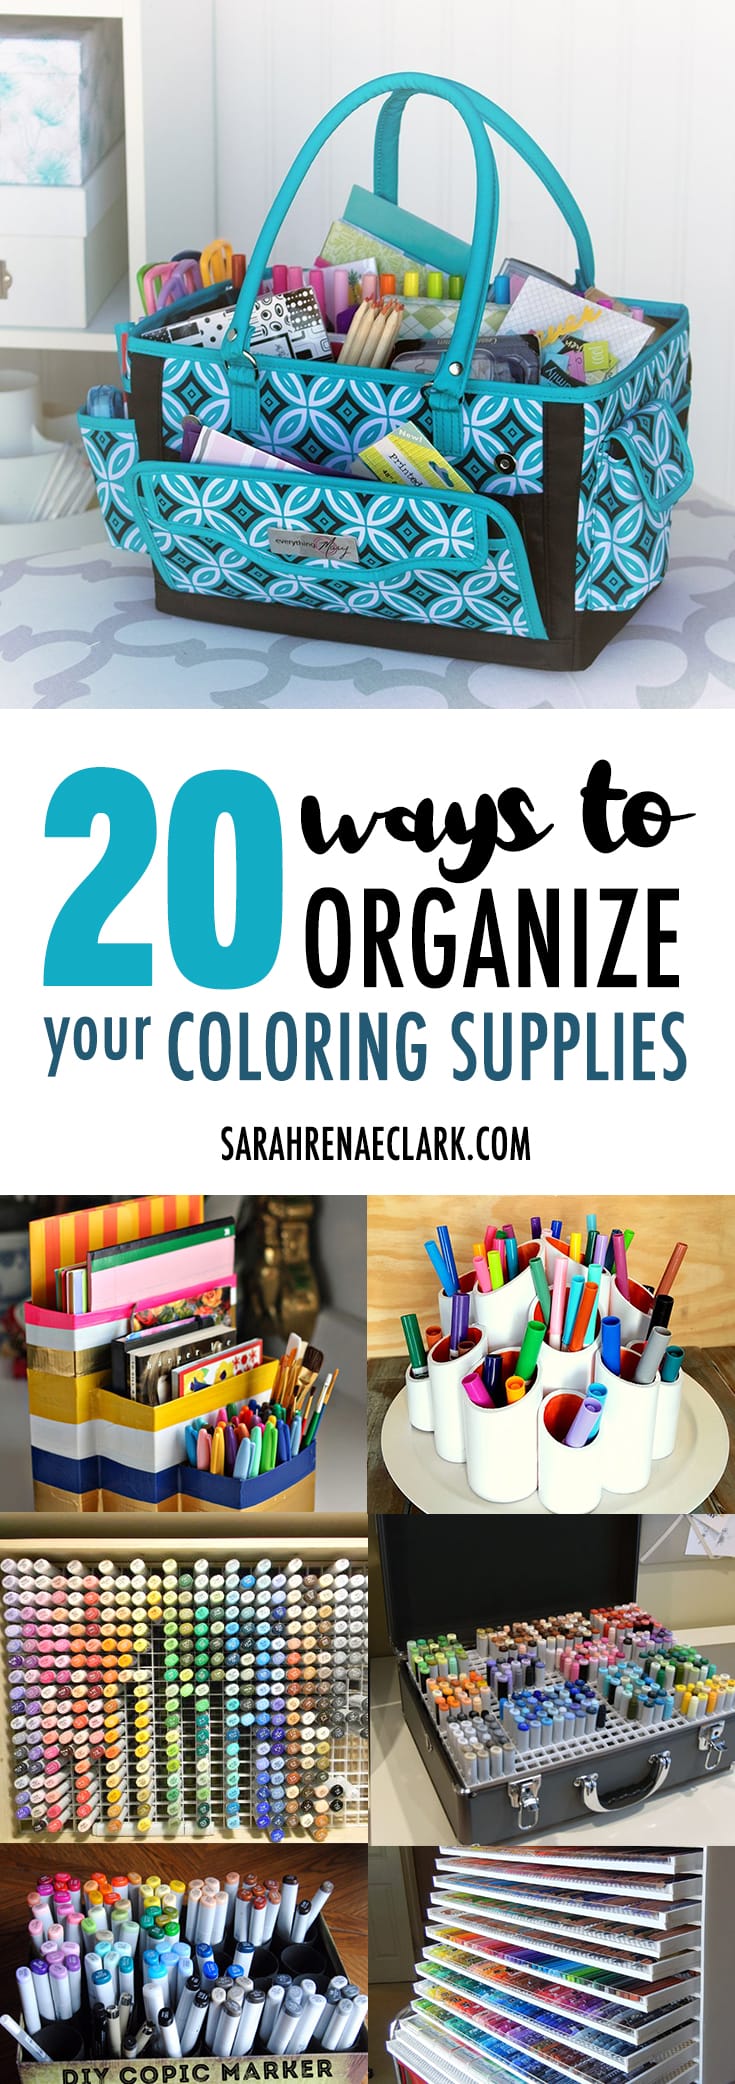 http://sarahrenaeclark.com/wp-content/uploads/2016/11/20-Clever-Ways-to-Organize-Your-Coloring-Supplies-05.jpg